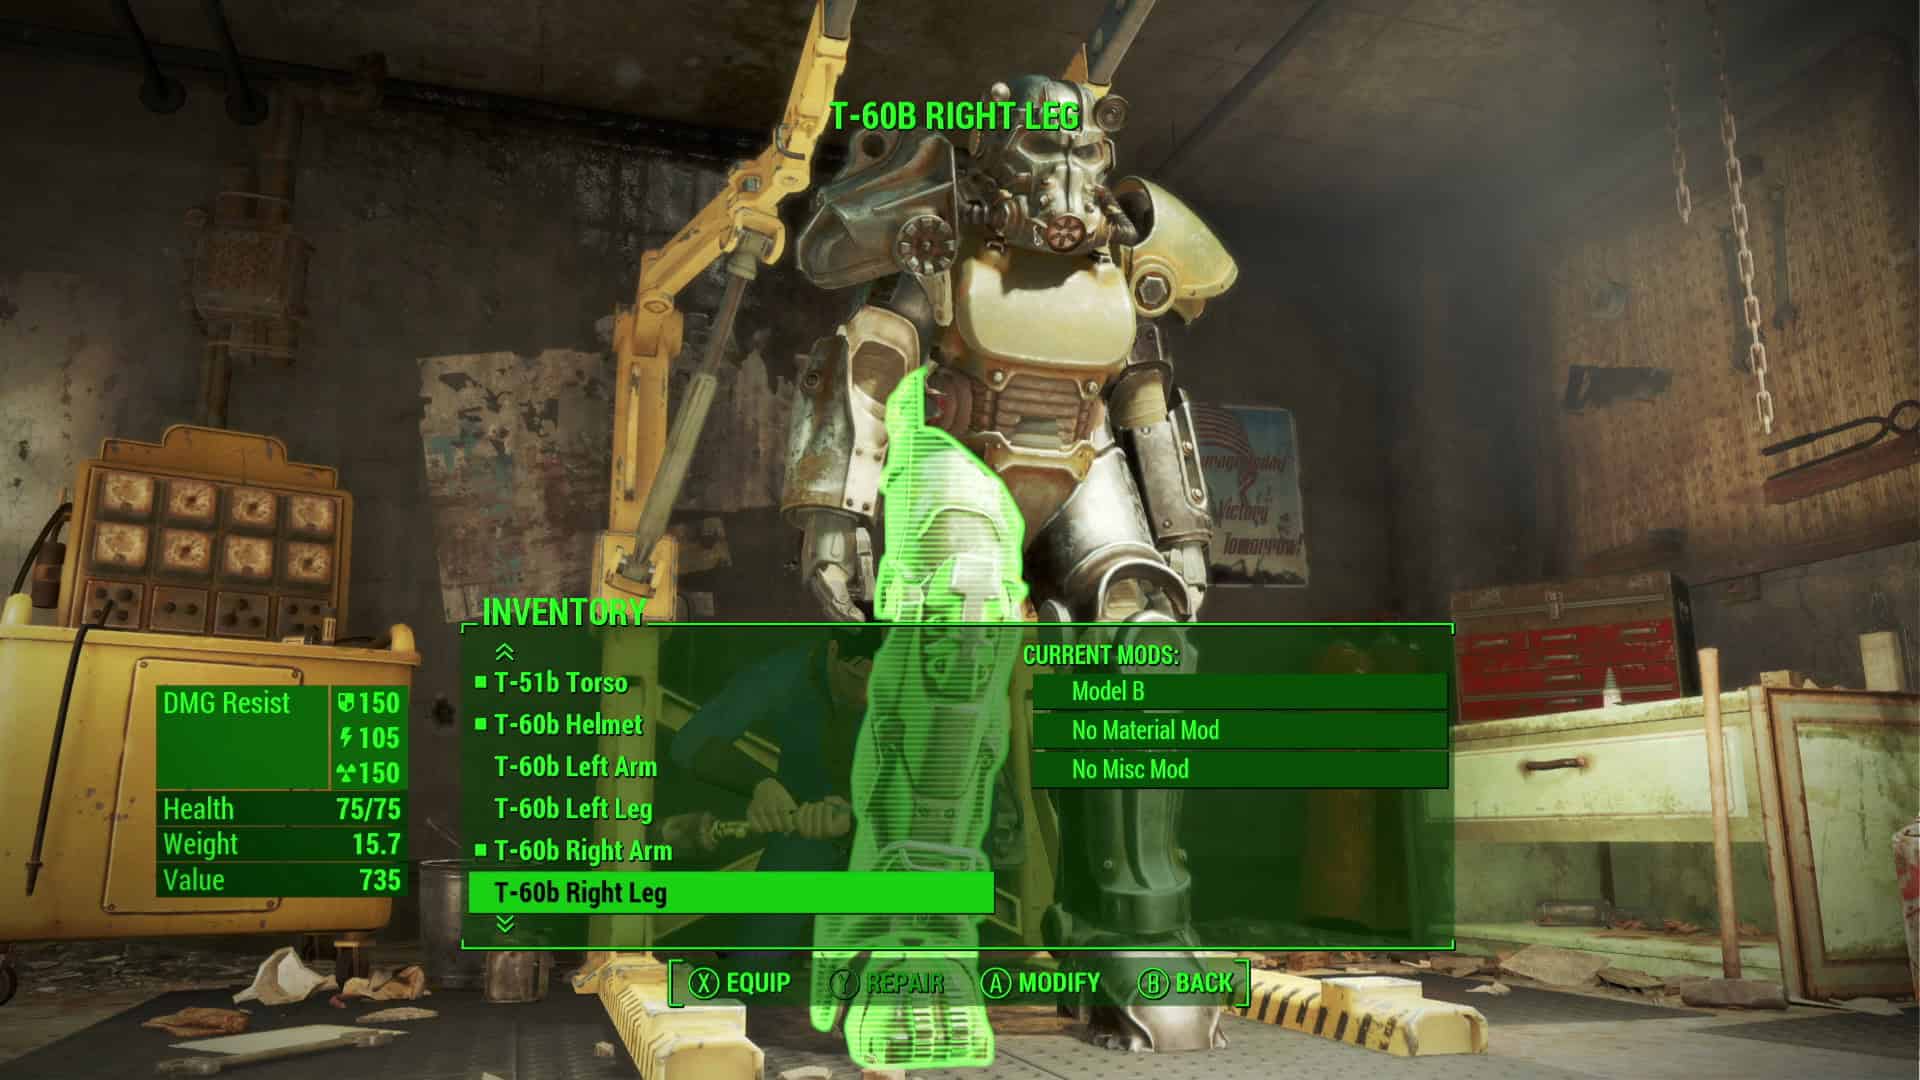 Power Armor in Fallout 4